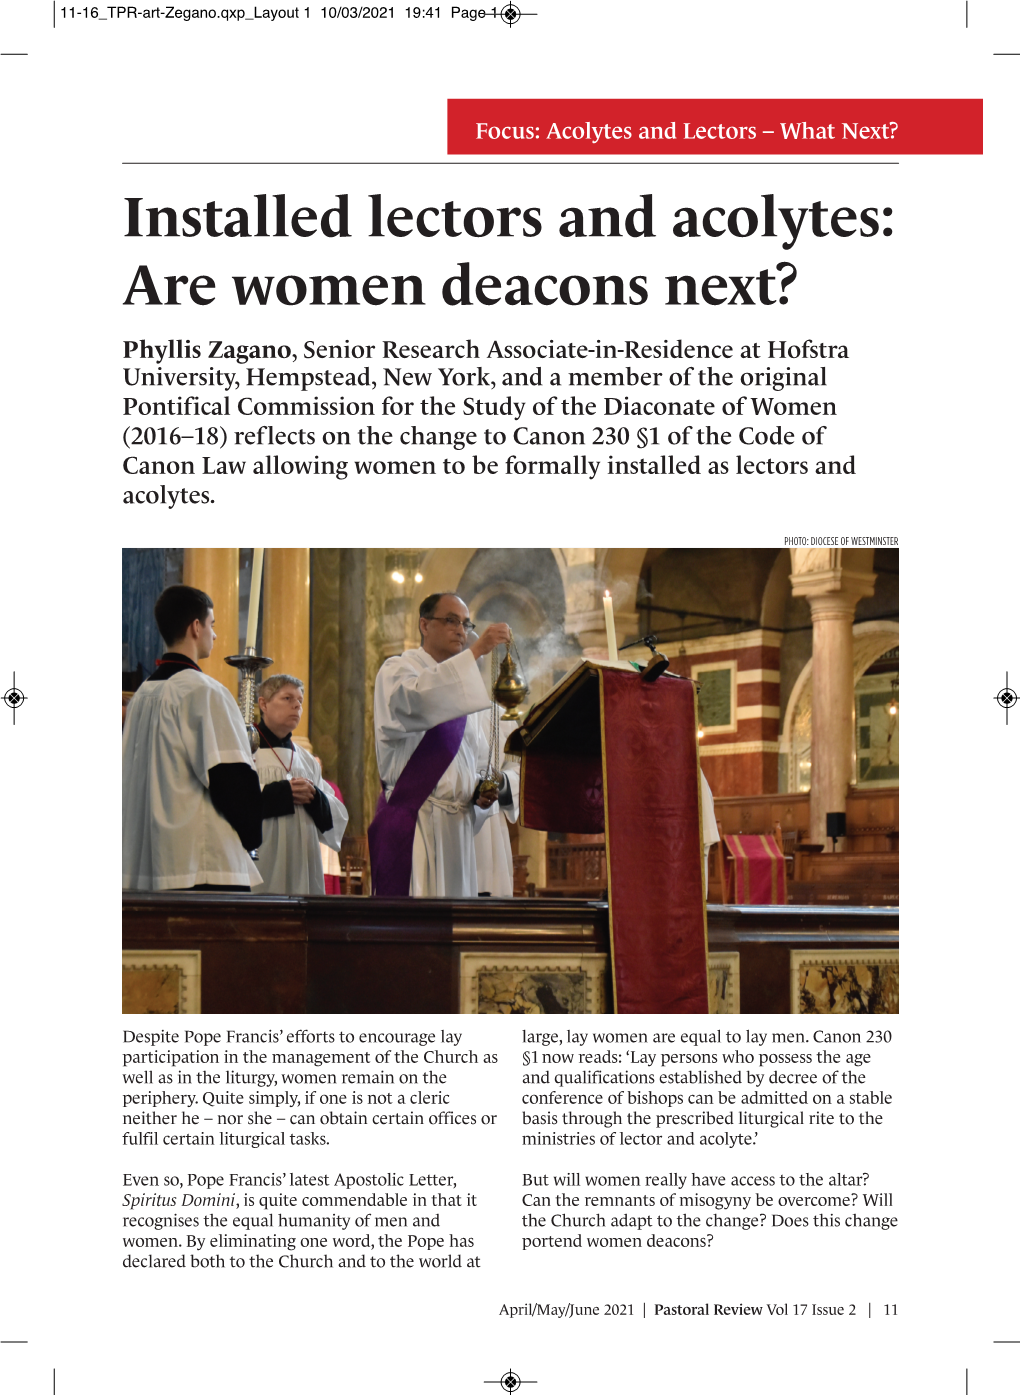 Installed Lectors and Acolytes: Are Women